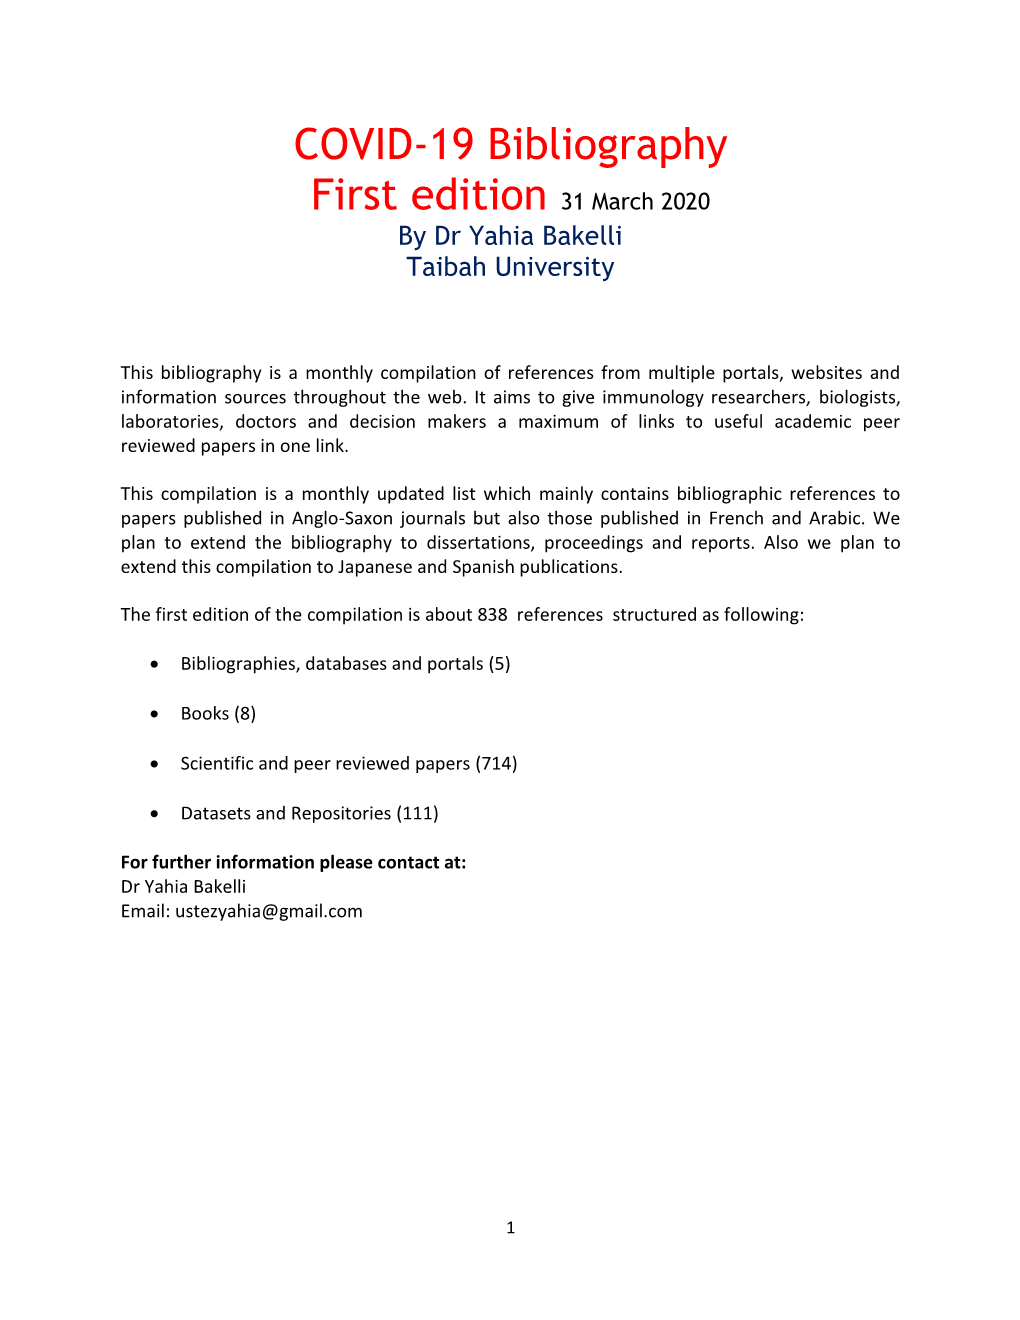 COVID-19 Bibliography First Edition 31 March 2020 by Dr Yahia Bakelli Taibah University